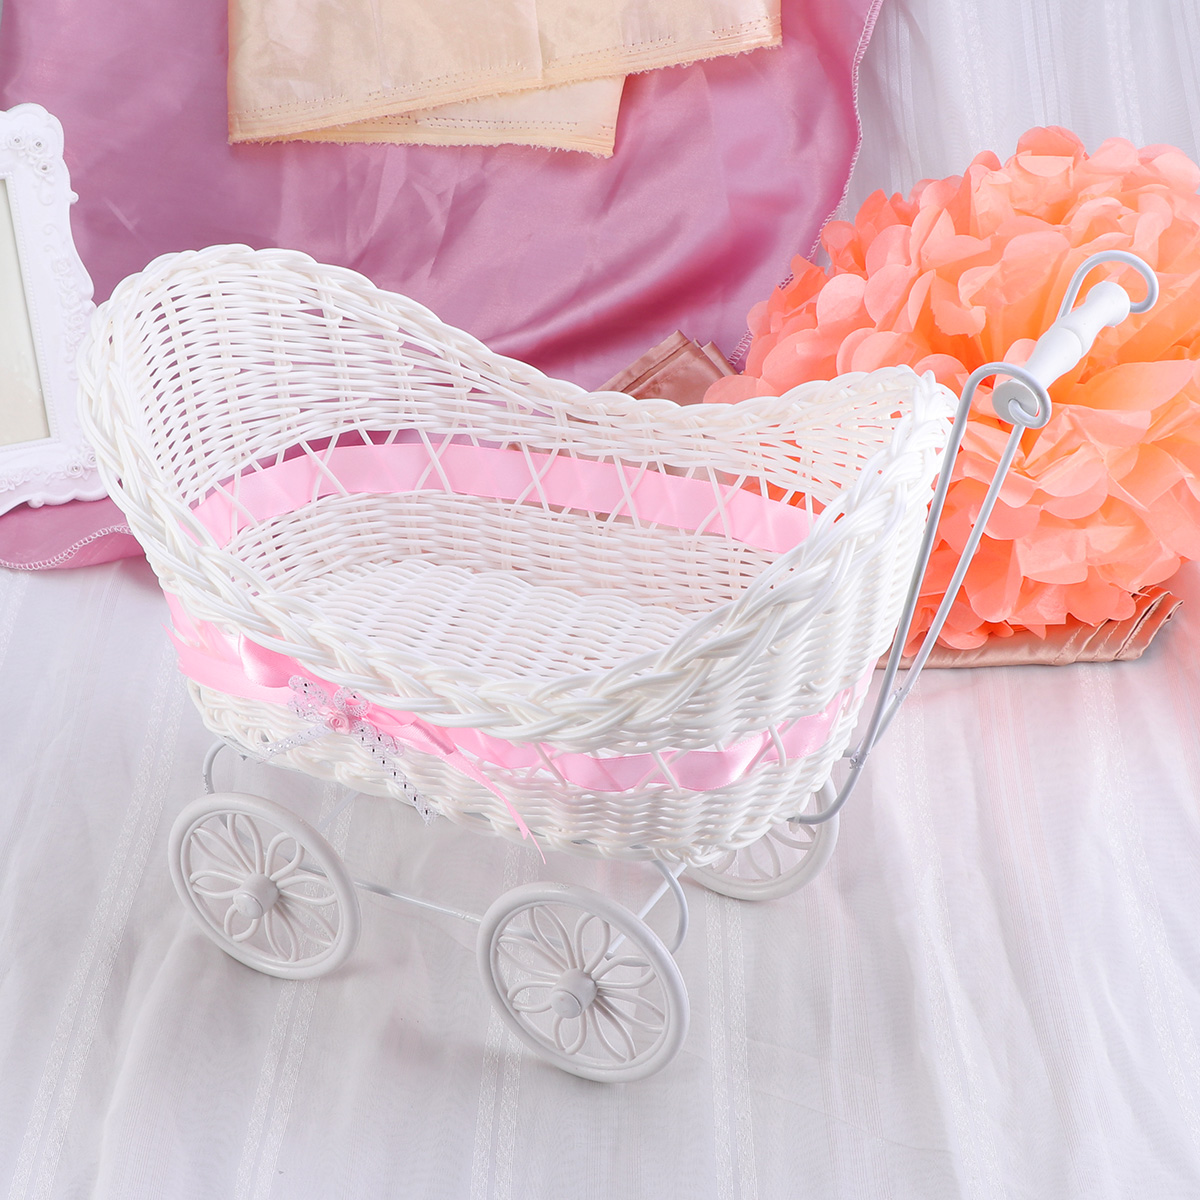 Cart Cane Tricycles Flower Basket Knitted Flower Mini Car Furnishing Articles for Wedding Baby Shower Party Birthday Decor